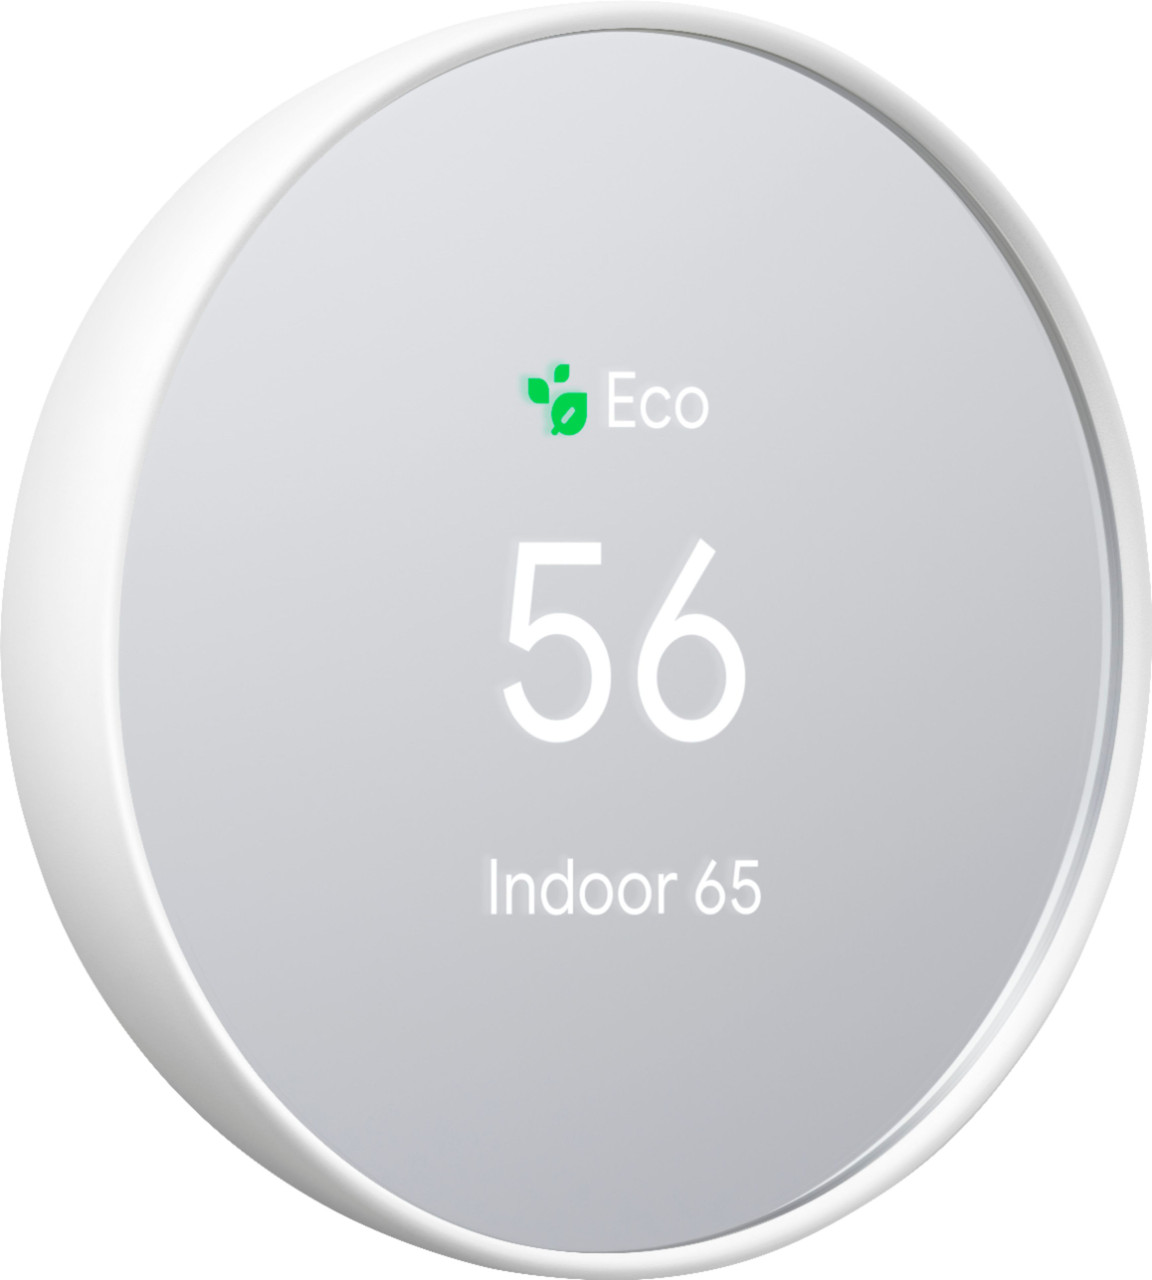 Google Nest Thermostat - Programmable Smart Wi-Fi Thermostat for Home - Snow